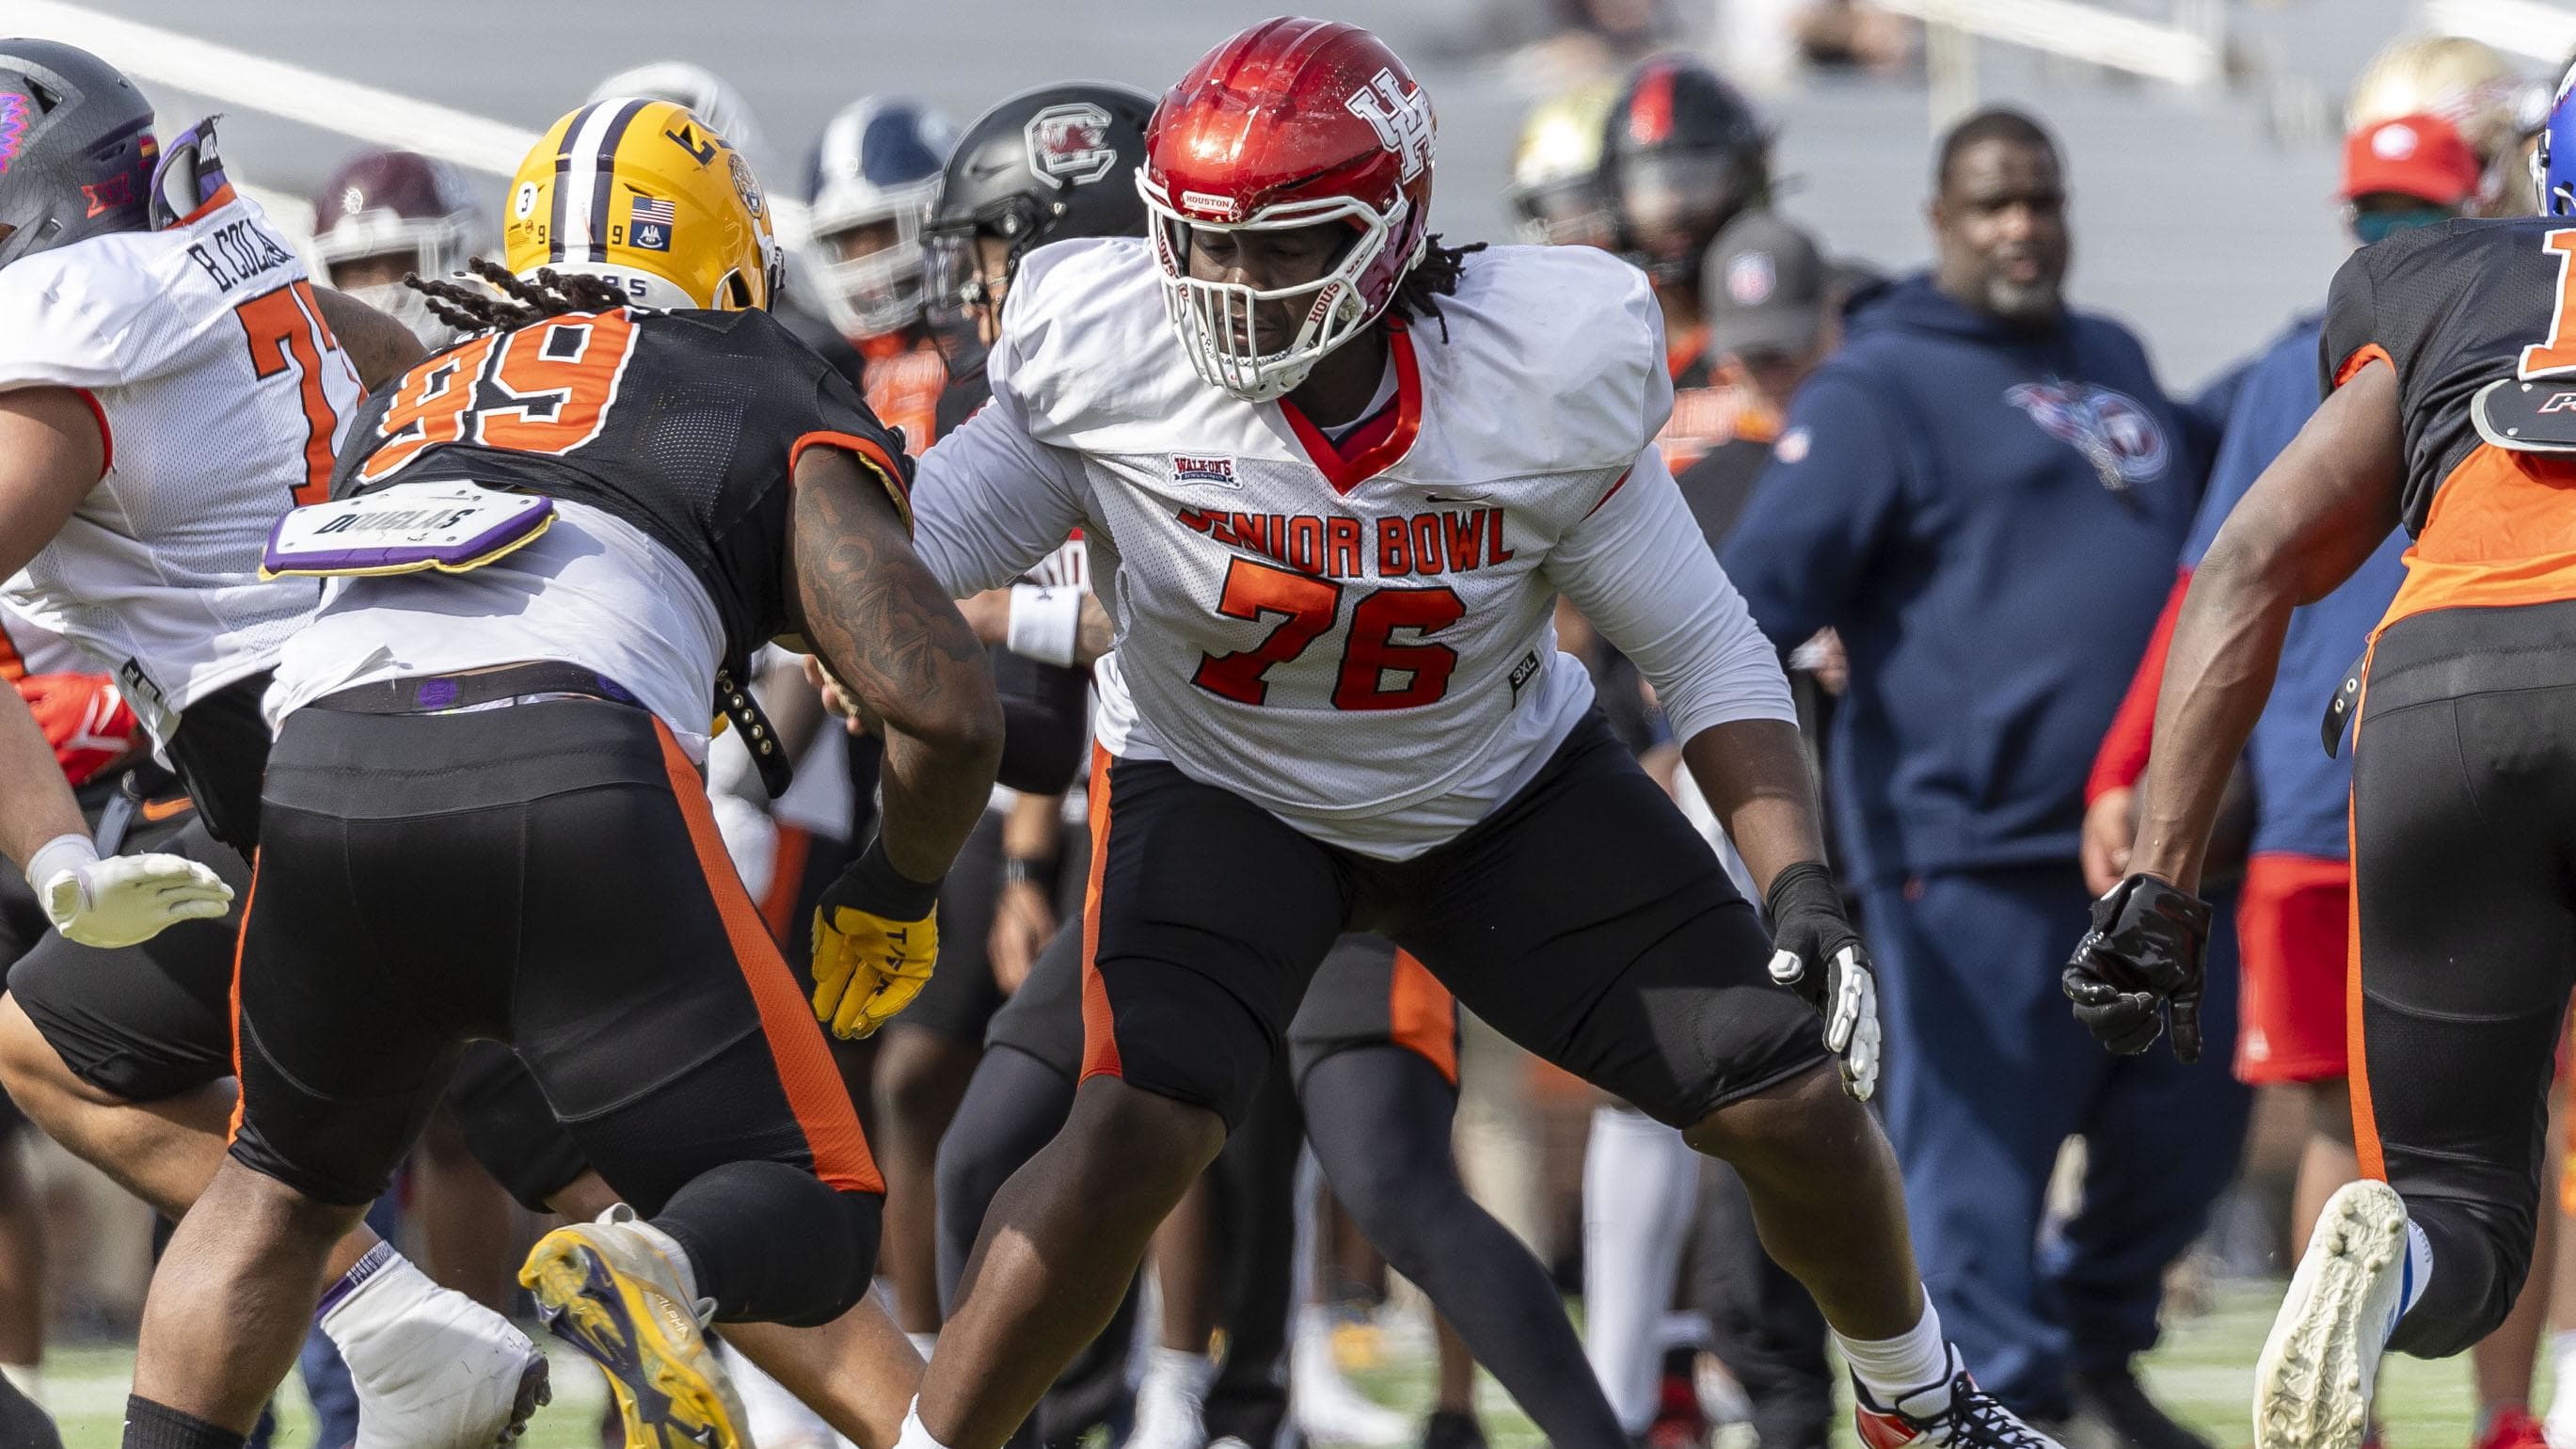 Houston offensive lineman Patrick Paul of Houston (76) faces off with an edge rusher at the Senior Bowl.